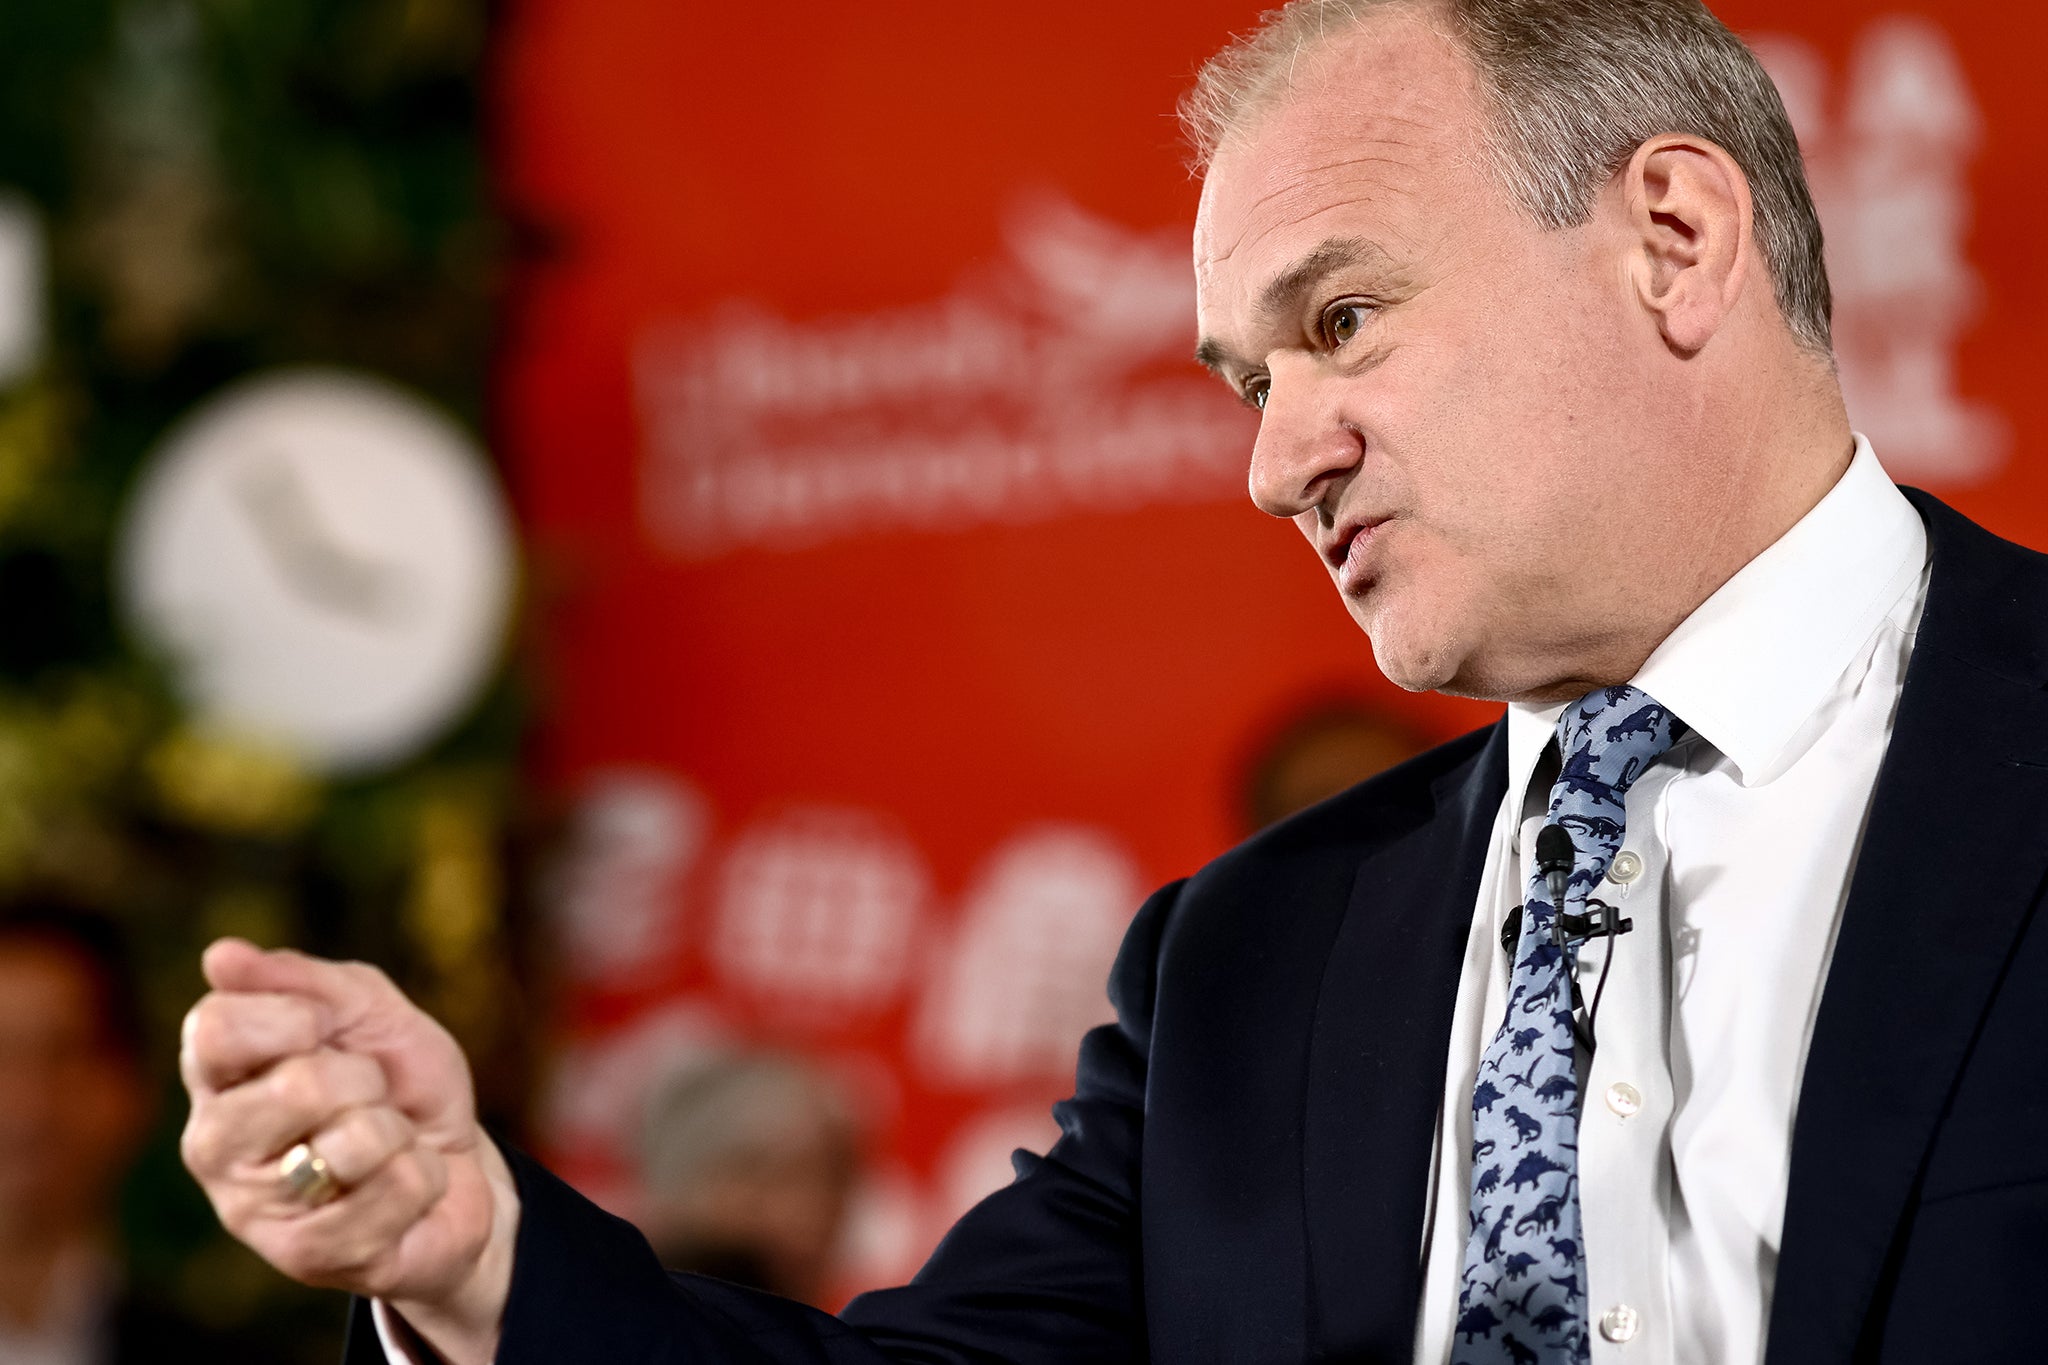 Leader of the Liberal Democrats Ed Davey speaks at the party’s manifesto launch